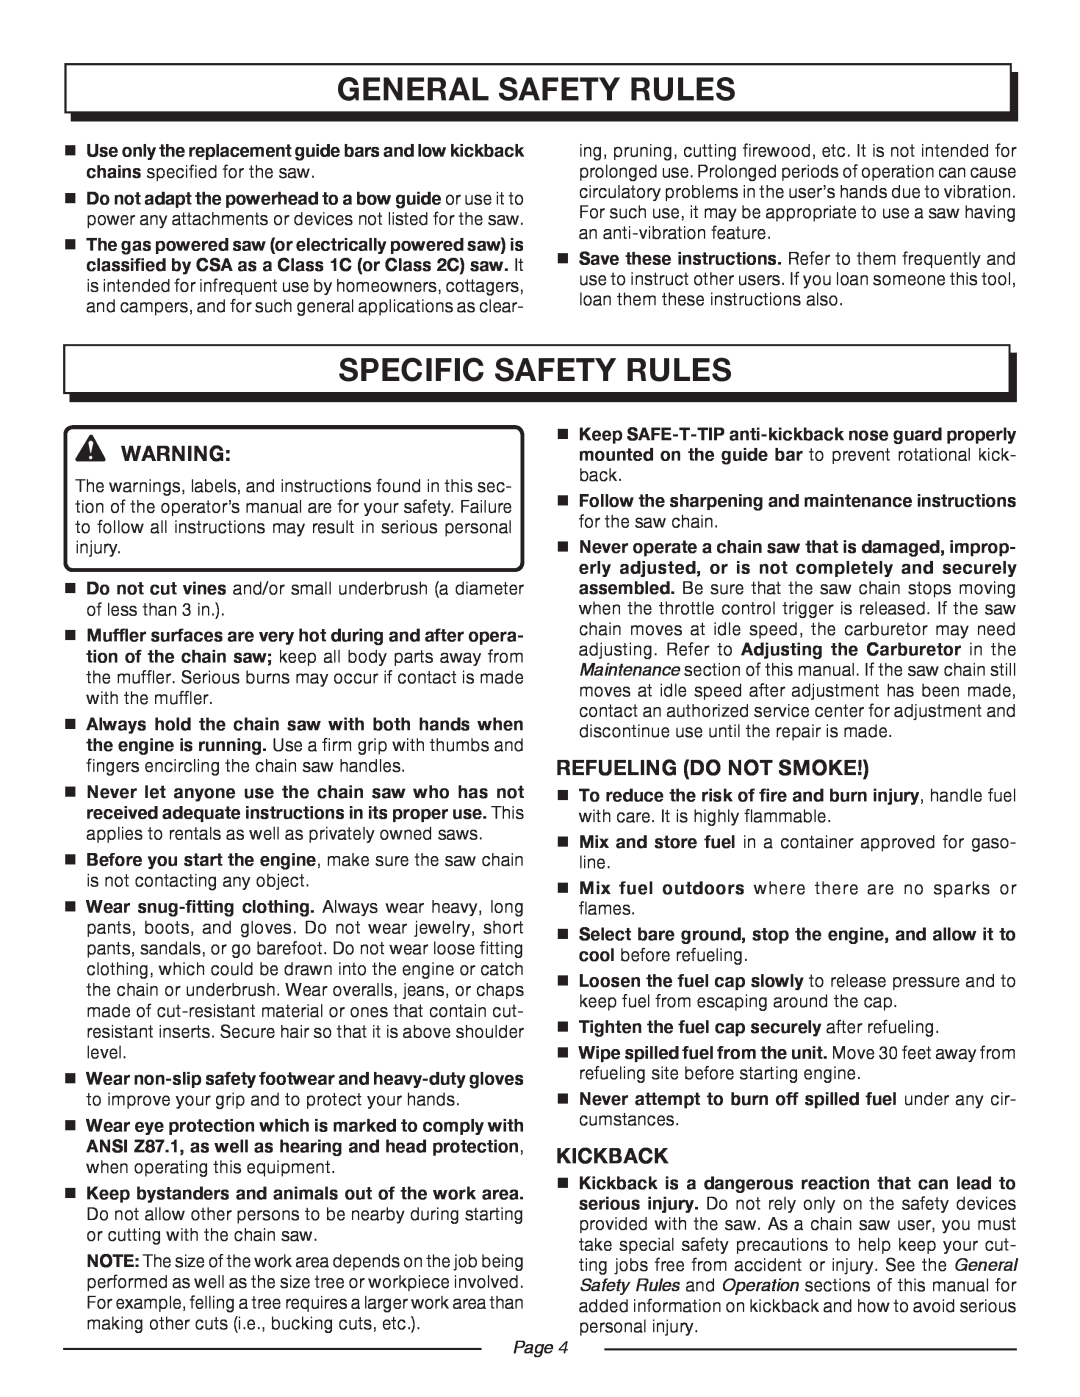 Homelite UT10516/16 IN. 33CC manual specific safety rules, Refueling Do Not Smoke, Kickback, general safety rules, Page  